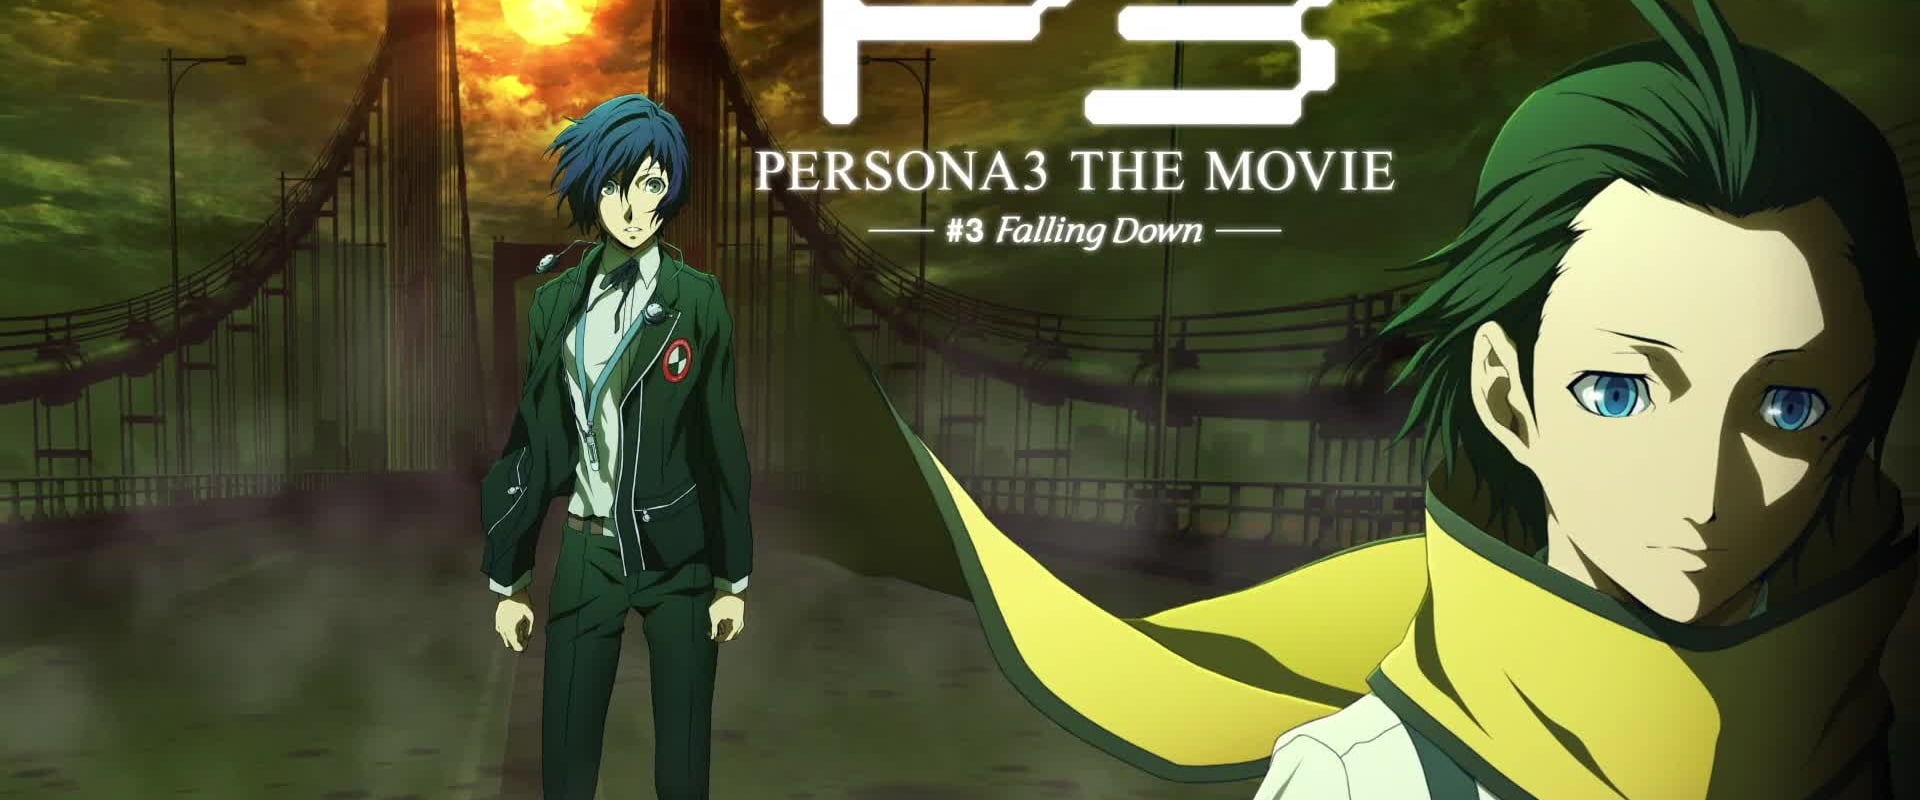 Persona 3 the Movie: #3 Falling Down